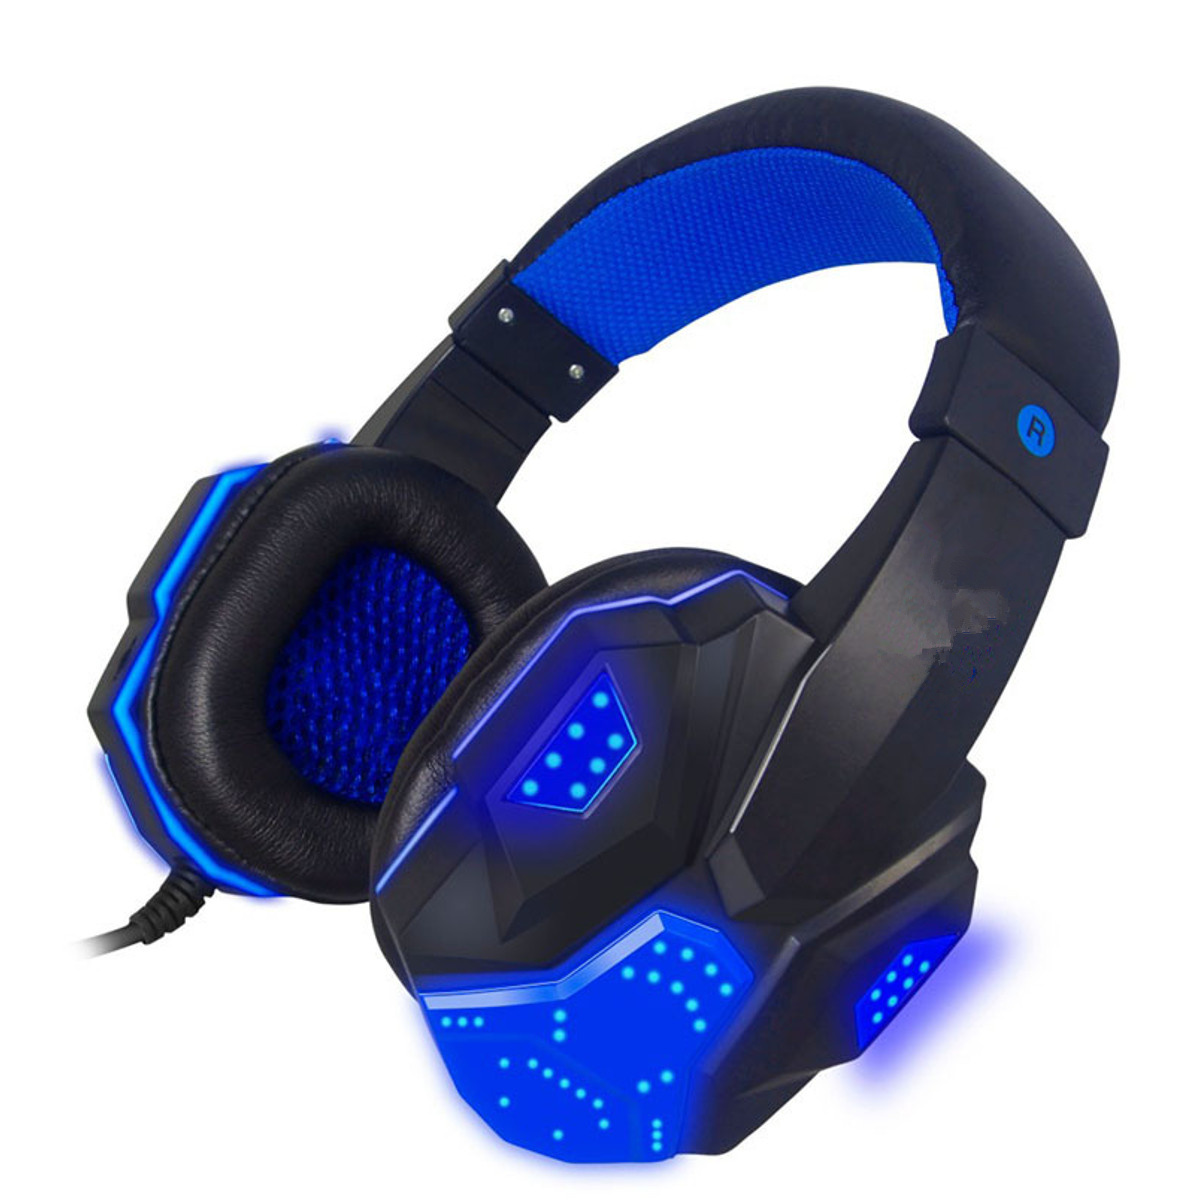 

3.5mm USB Wired Gaming Headband Headphone with LED Light Surround Stereo Headset for XBOX PS4 Game Console Computer